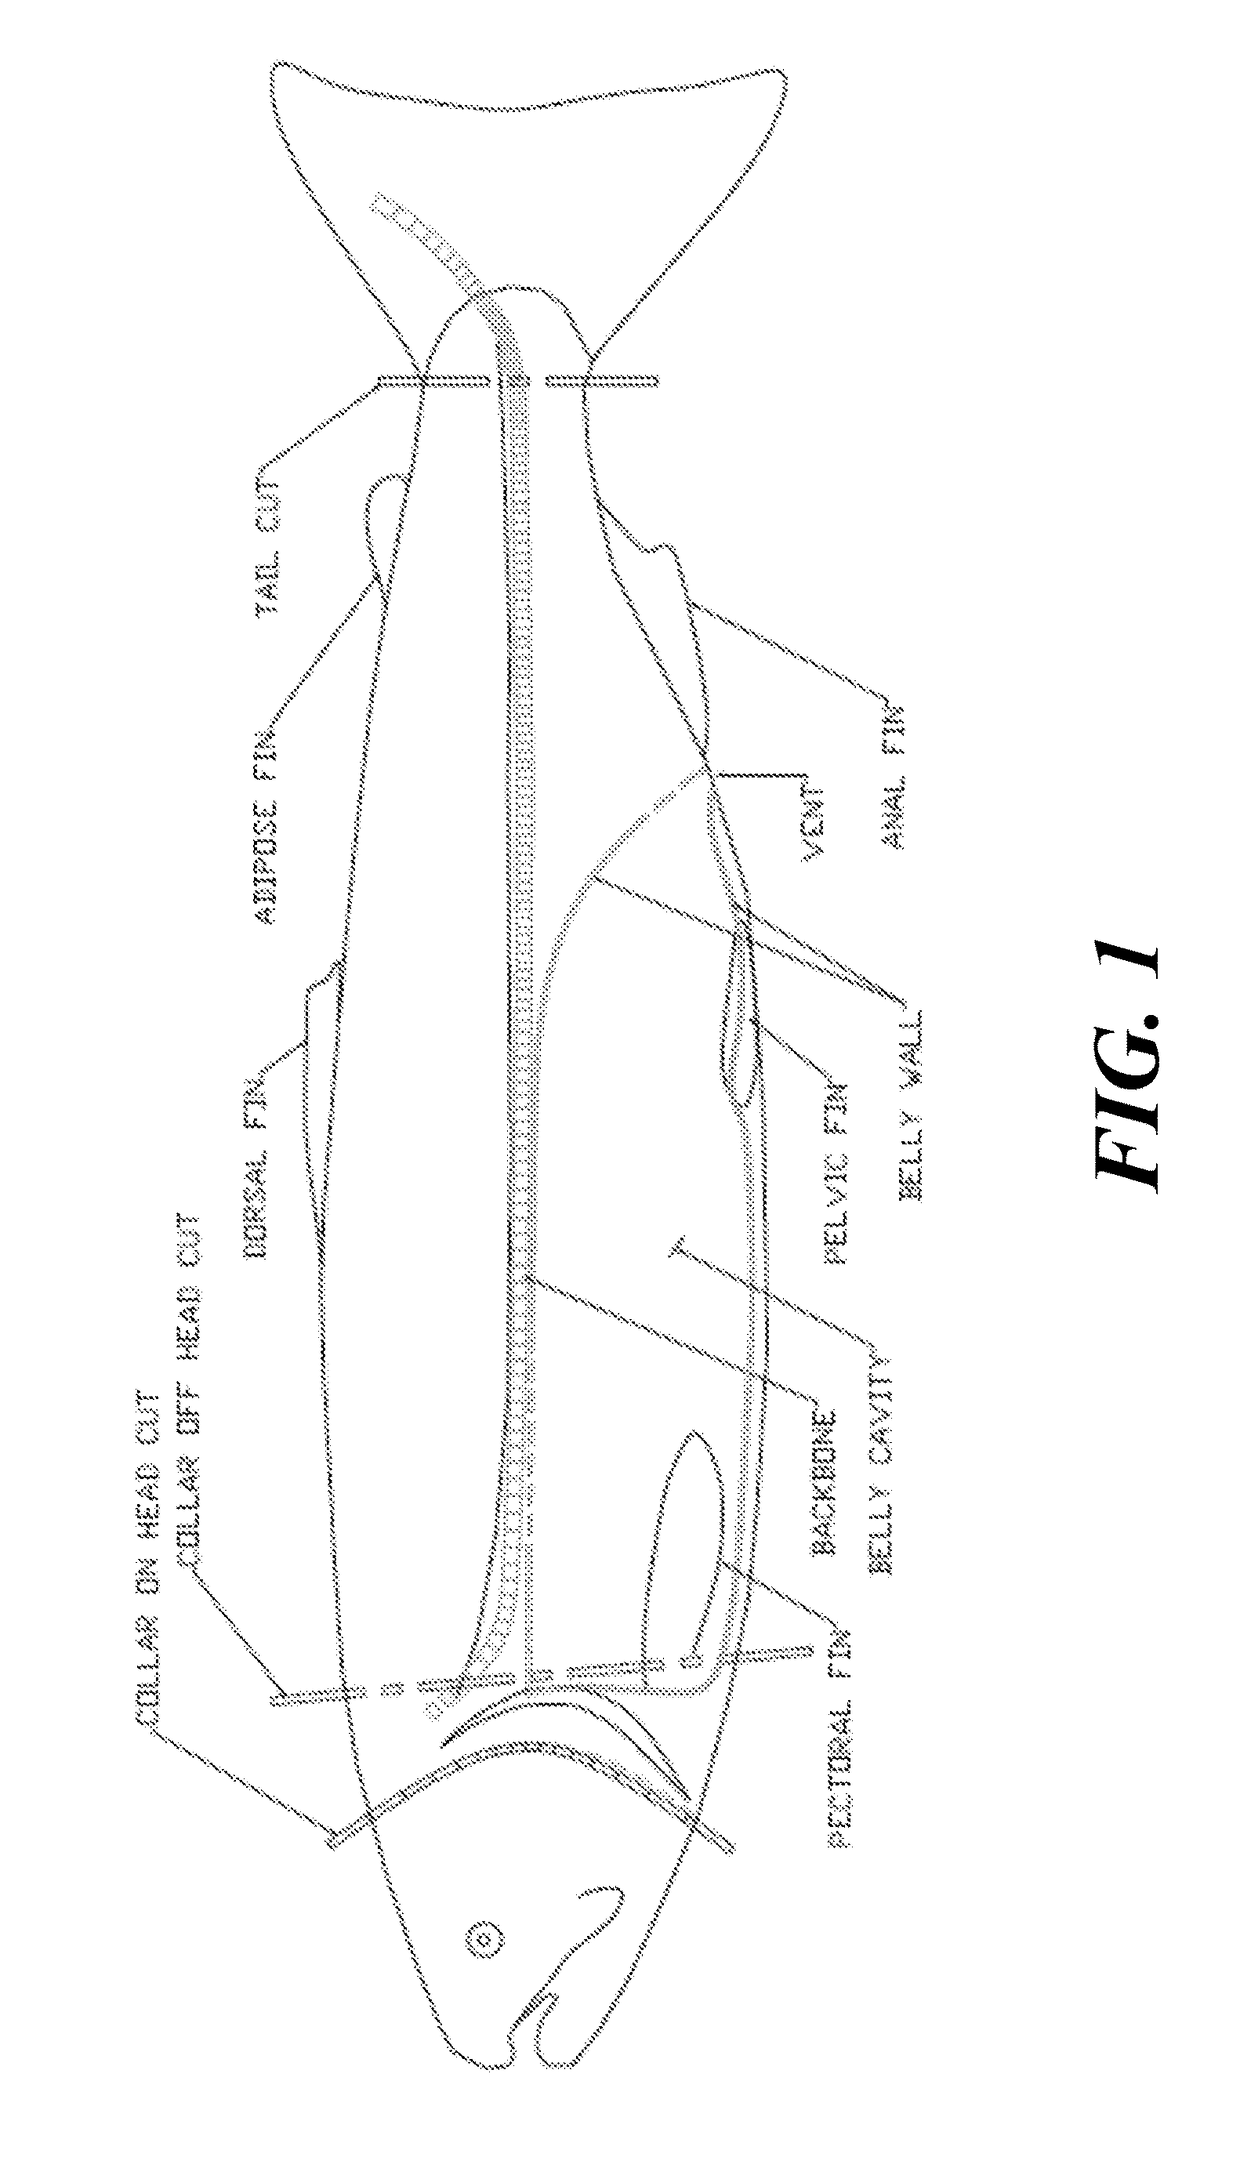 Fish processing systems and methods